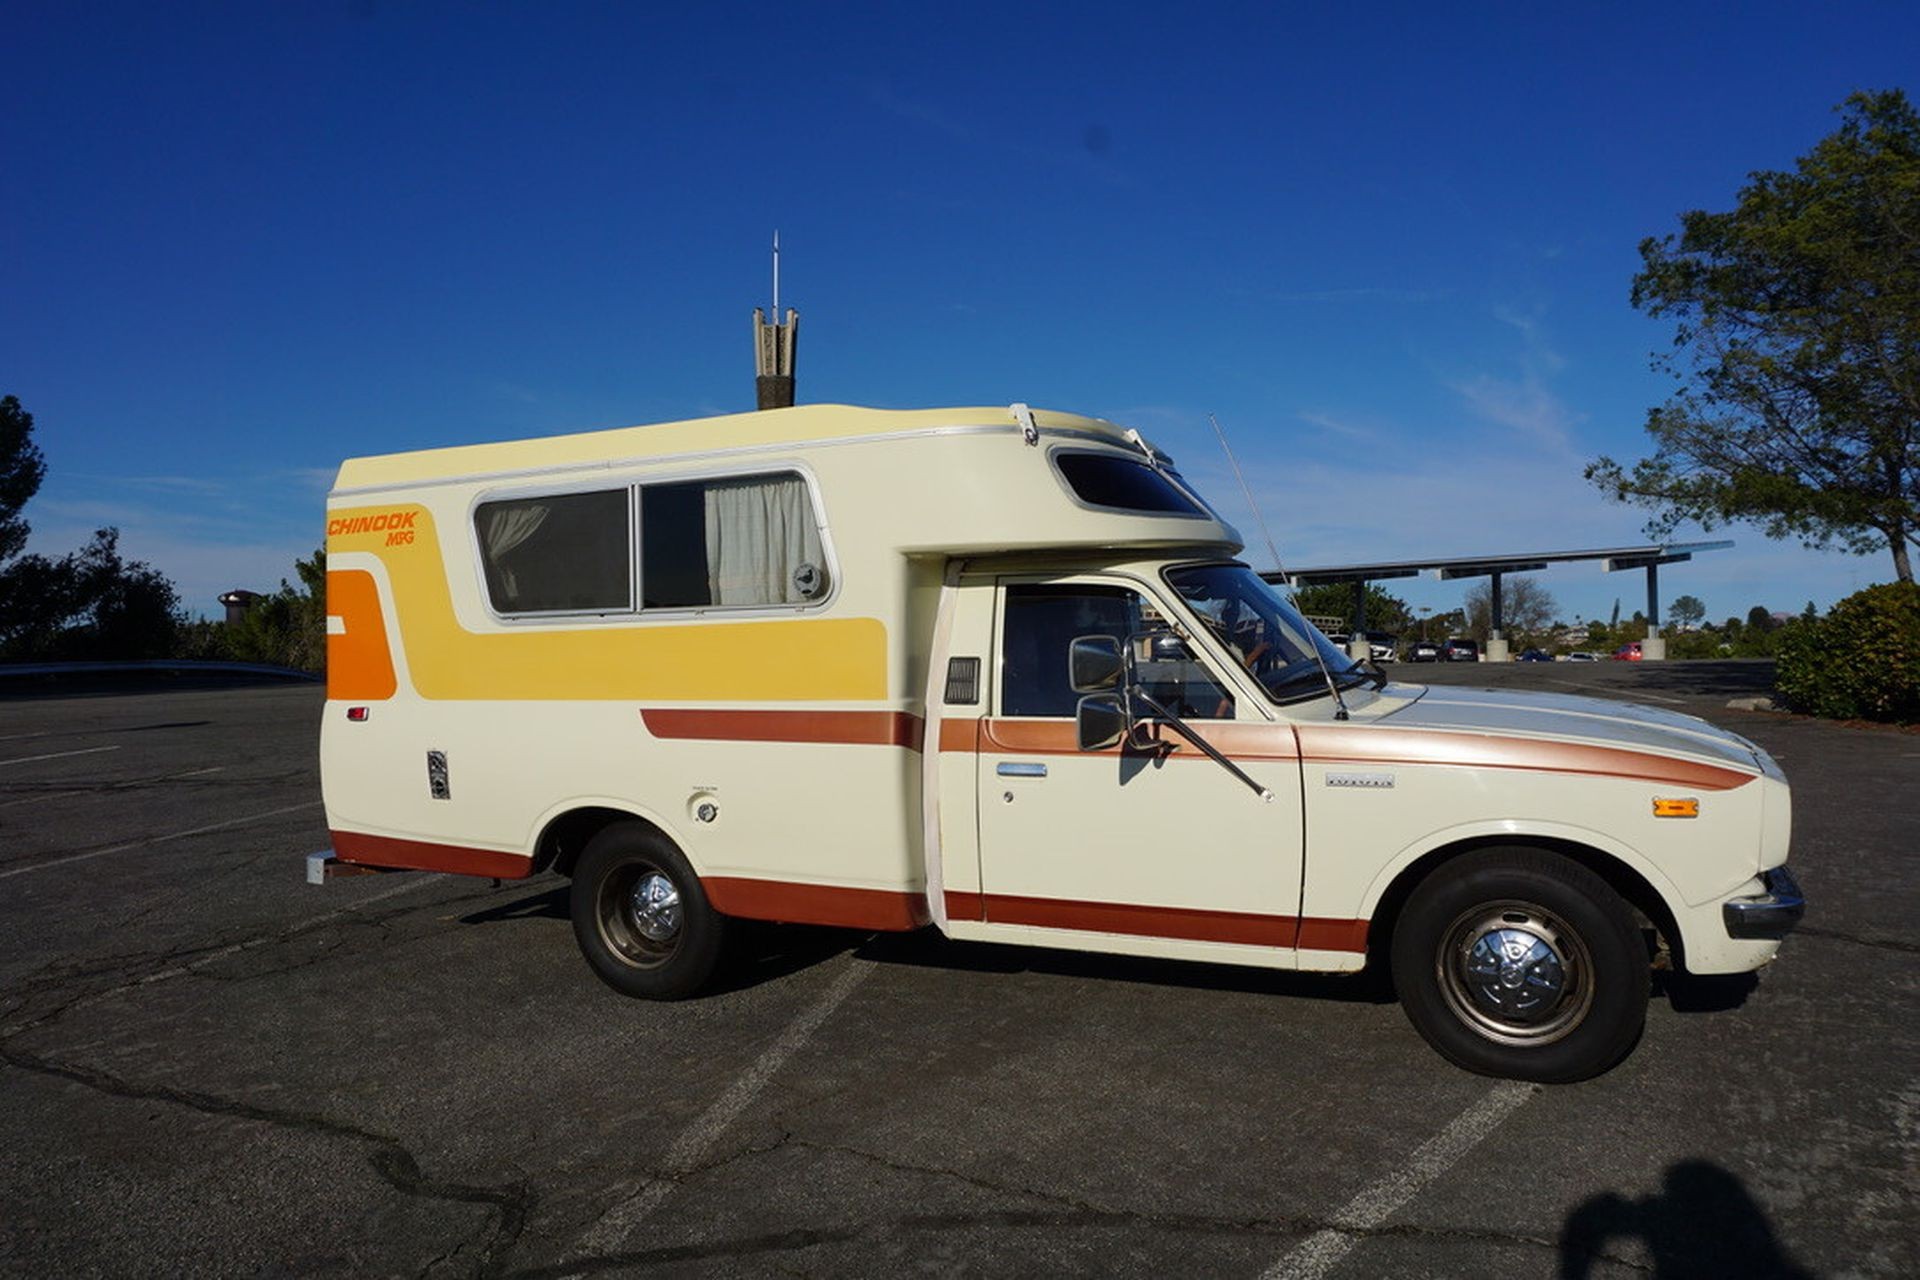 Find of the Day: Go Off-Road in a Retro 1978 Toyota Chinook RV Camper